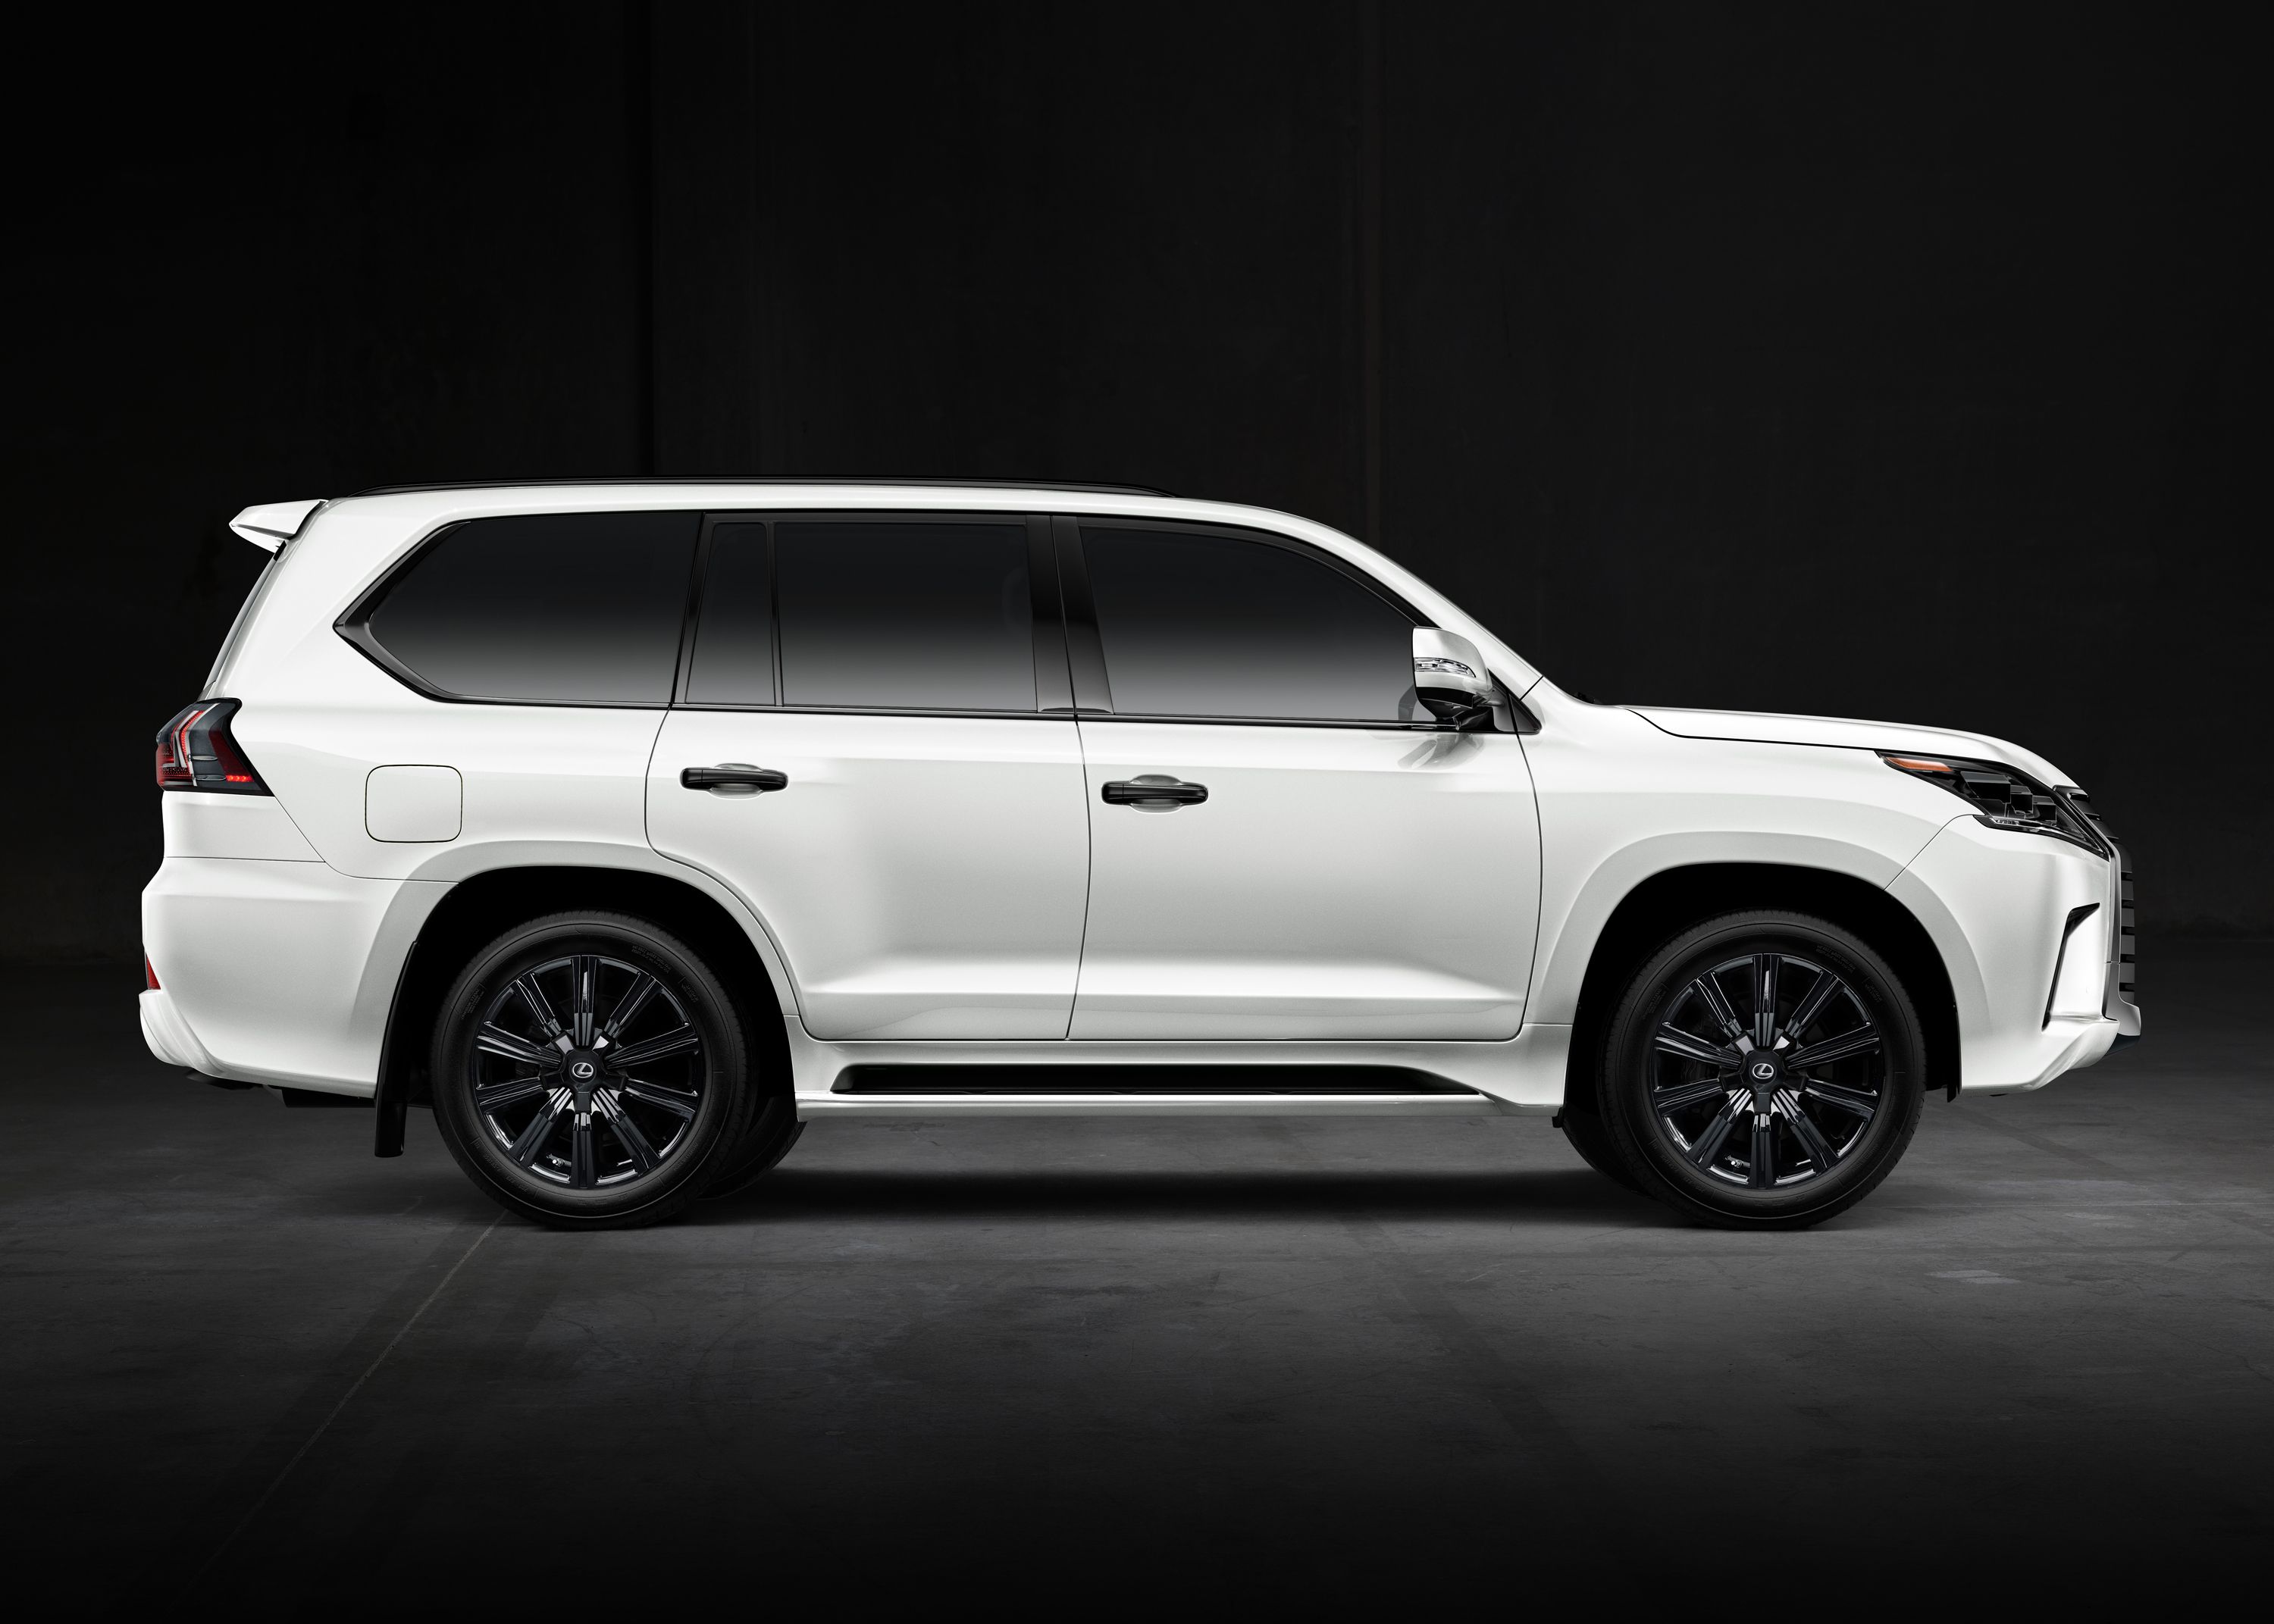 2021 Lexus LX Review, Pricing, and Specs